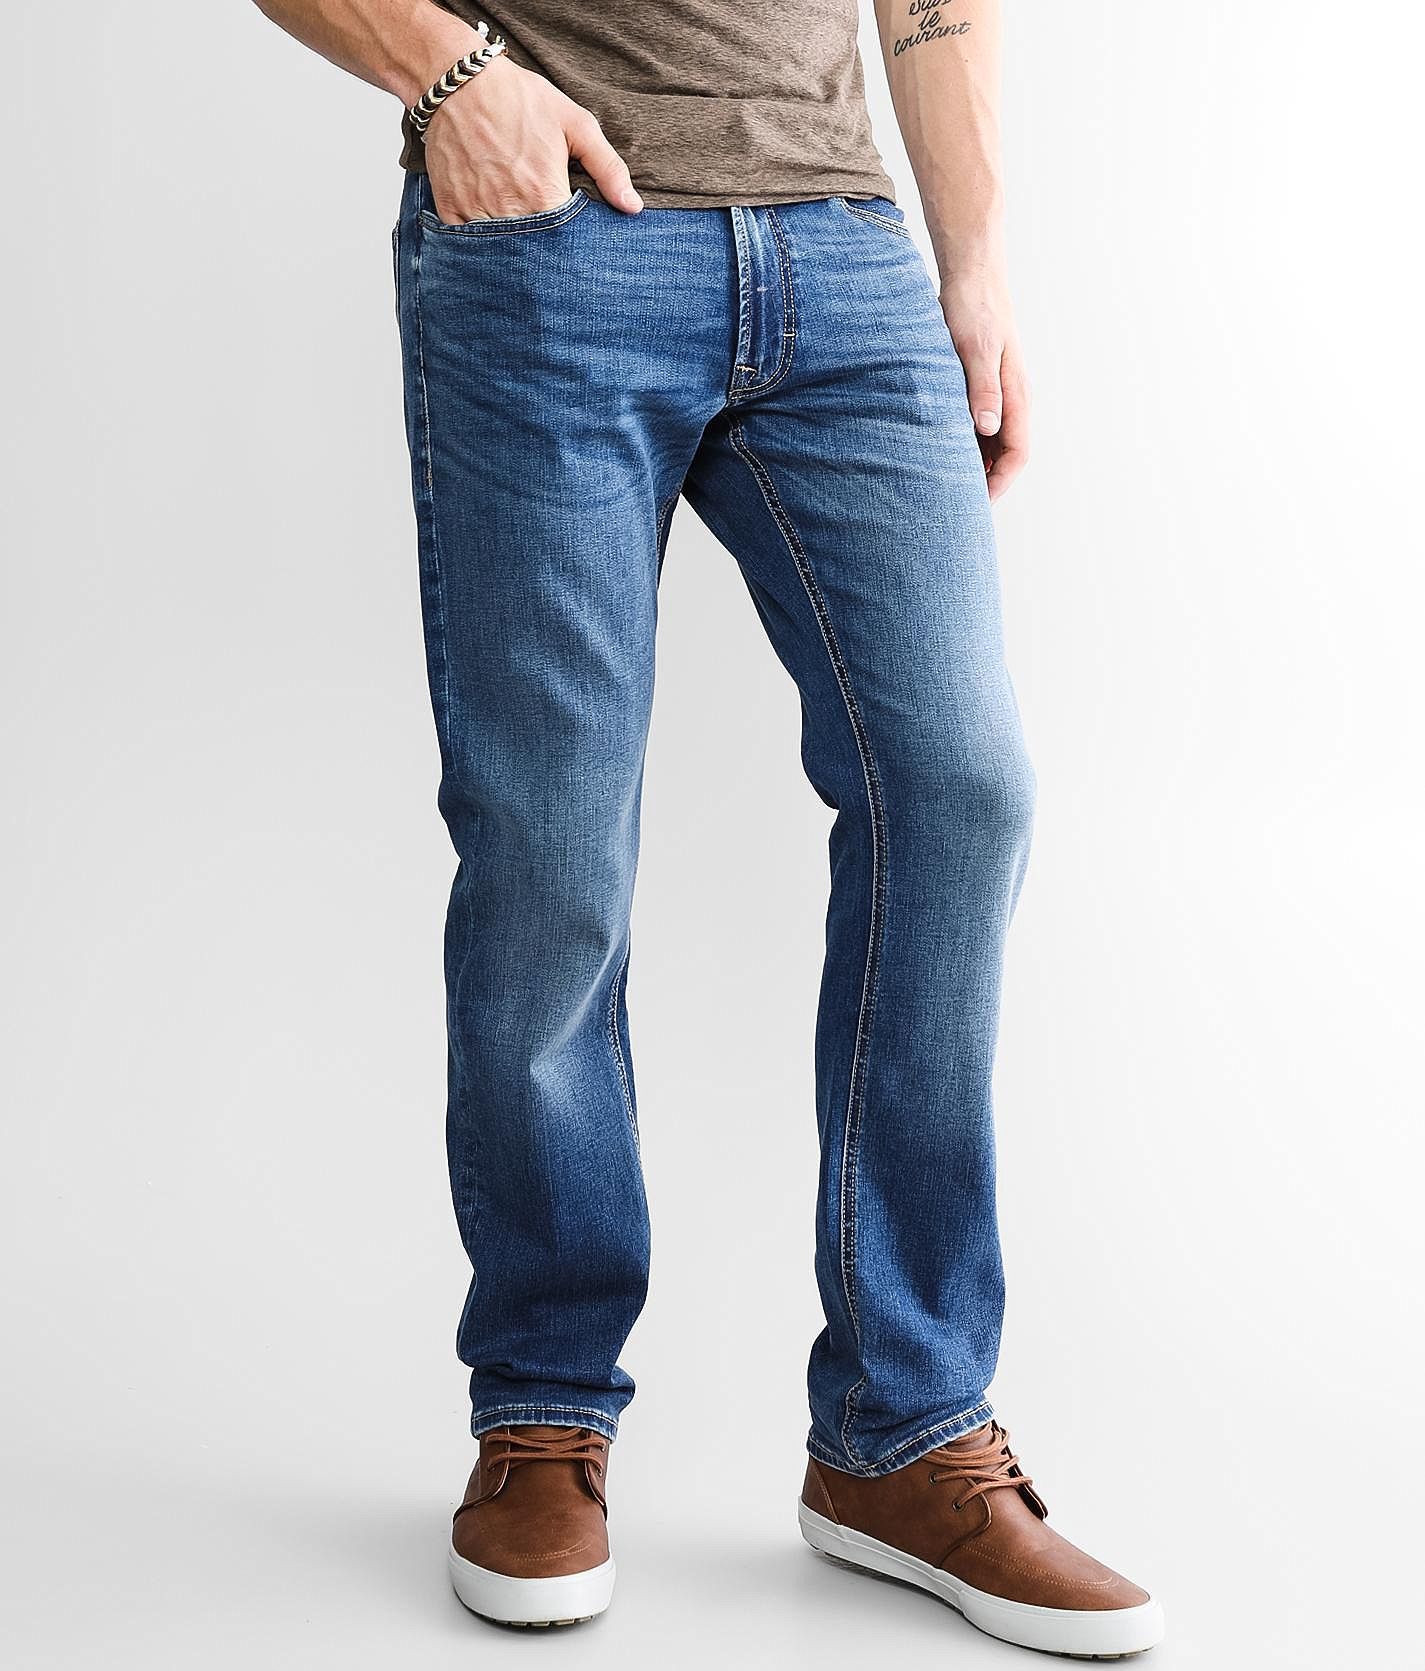 Outpost Makers Original Straight Stretch Jean - Men's Jeans in Tent | Buckle